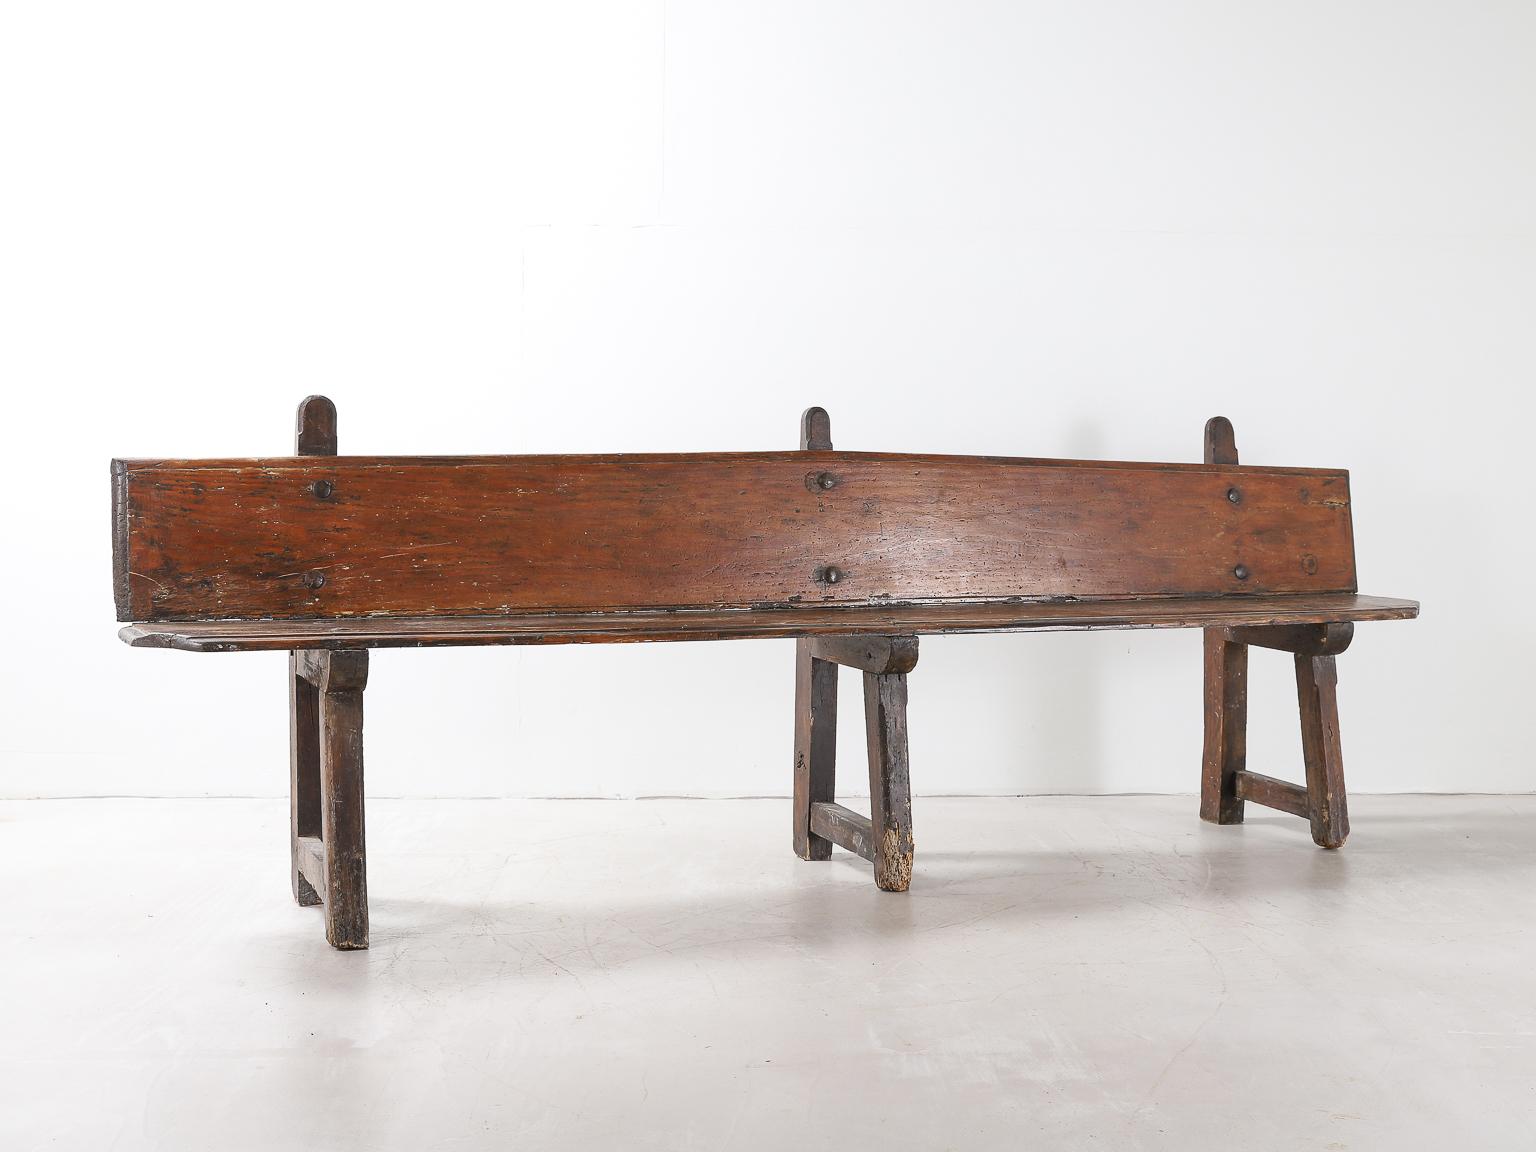 A long Spanish bench with iron rivets, supported by three legs. The legs have some ageing and wear due to age (see photos). Structurally the bench is in good condition.